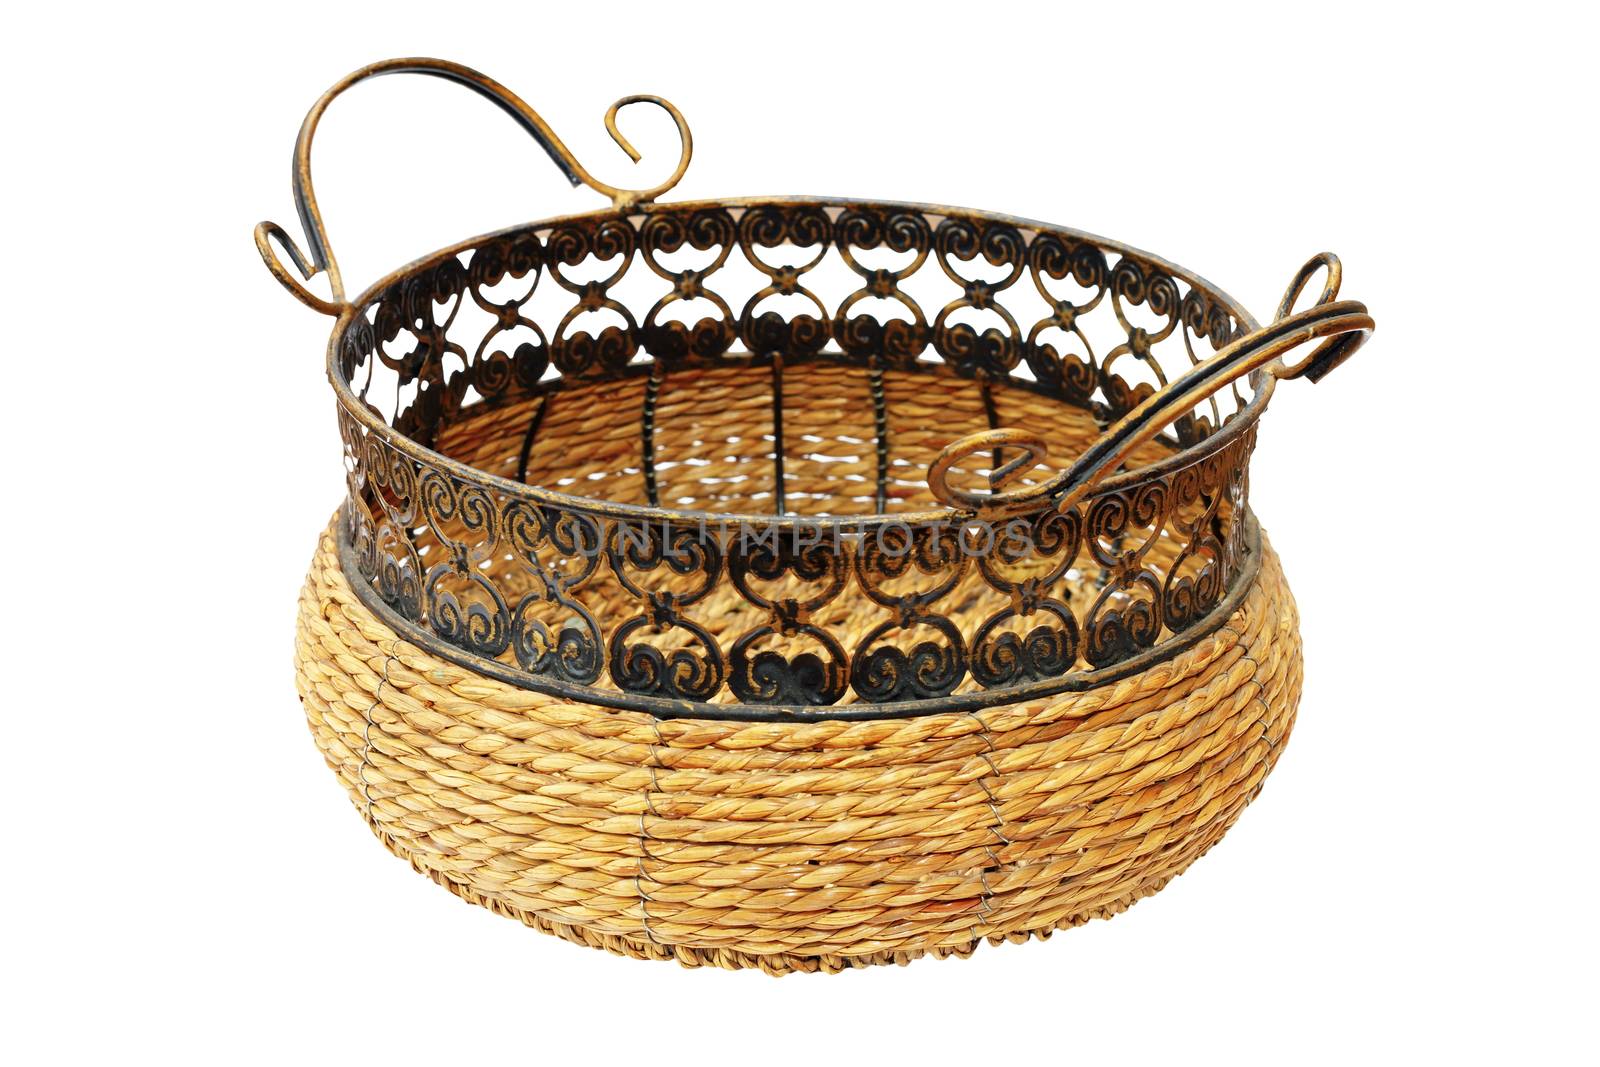 wicker basket for bread or fruits by taviphoto